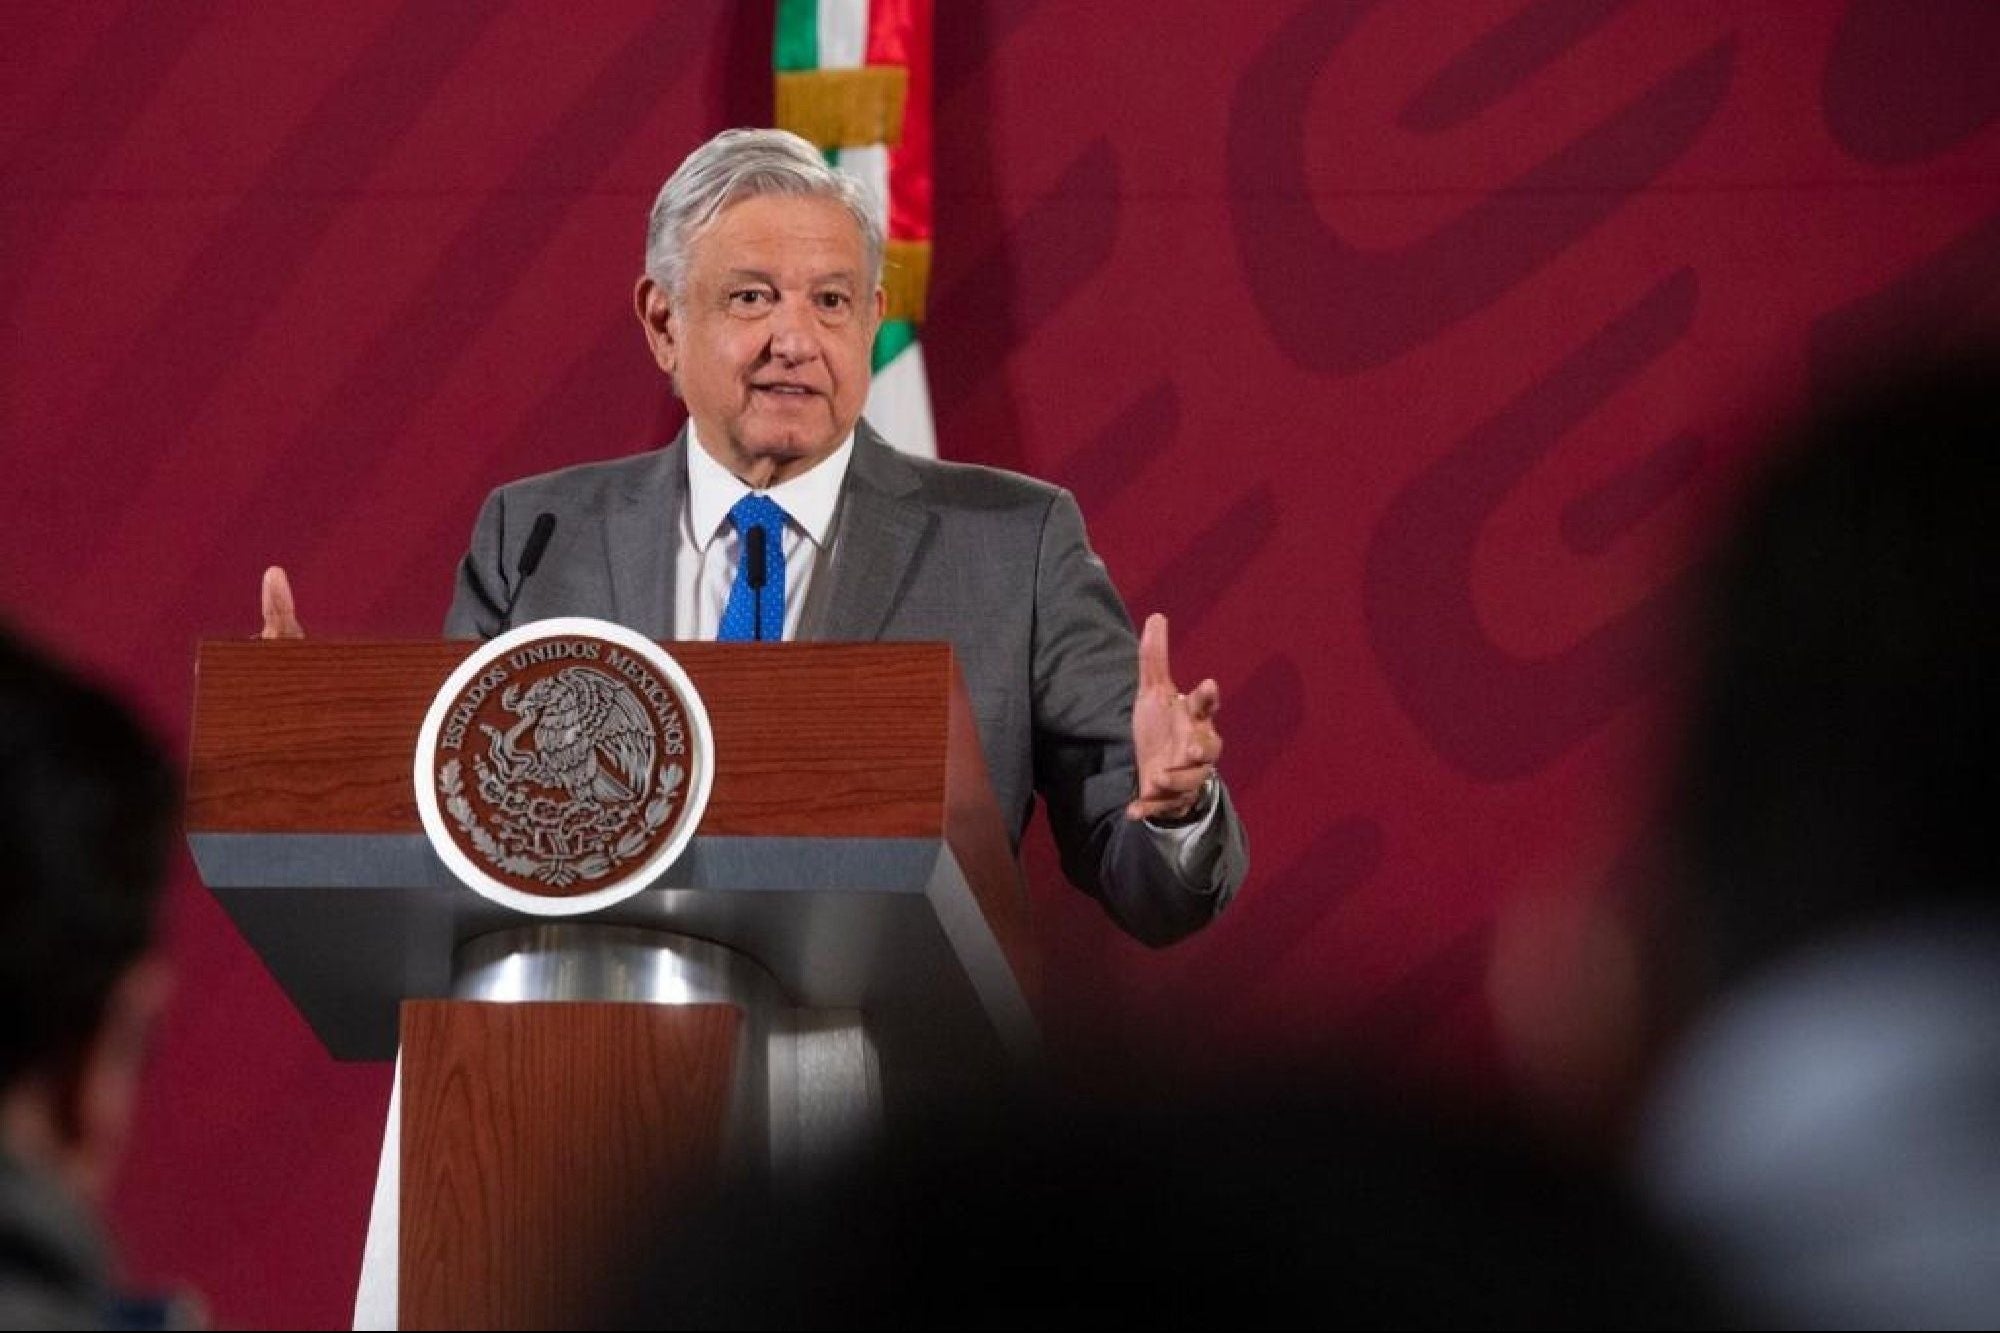 López Obrador confirmed that he tested positive for COVID-19 with this message